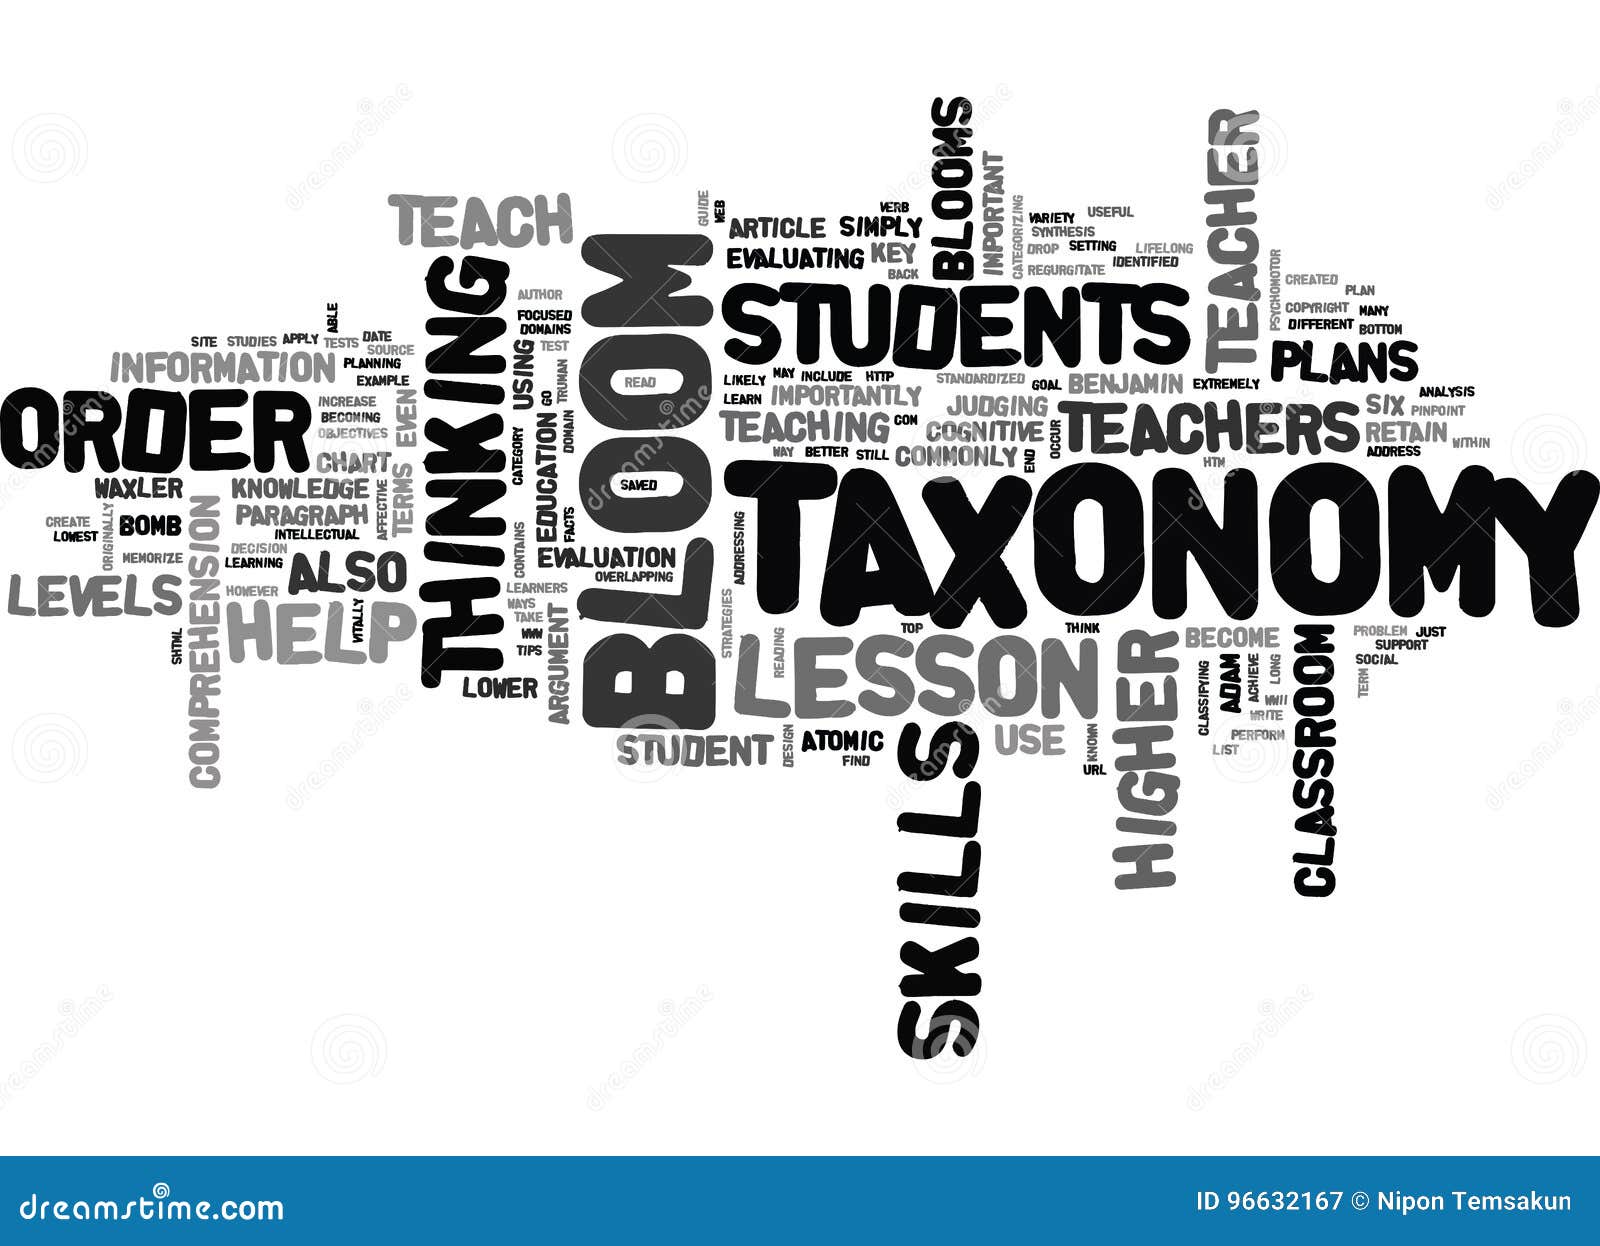 what is blooms taxonomy word cloud